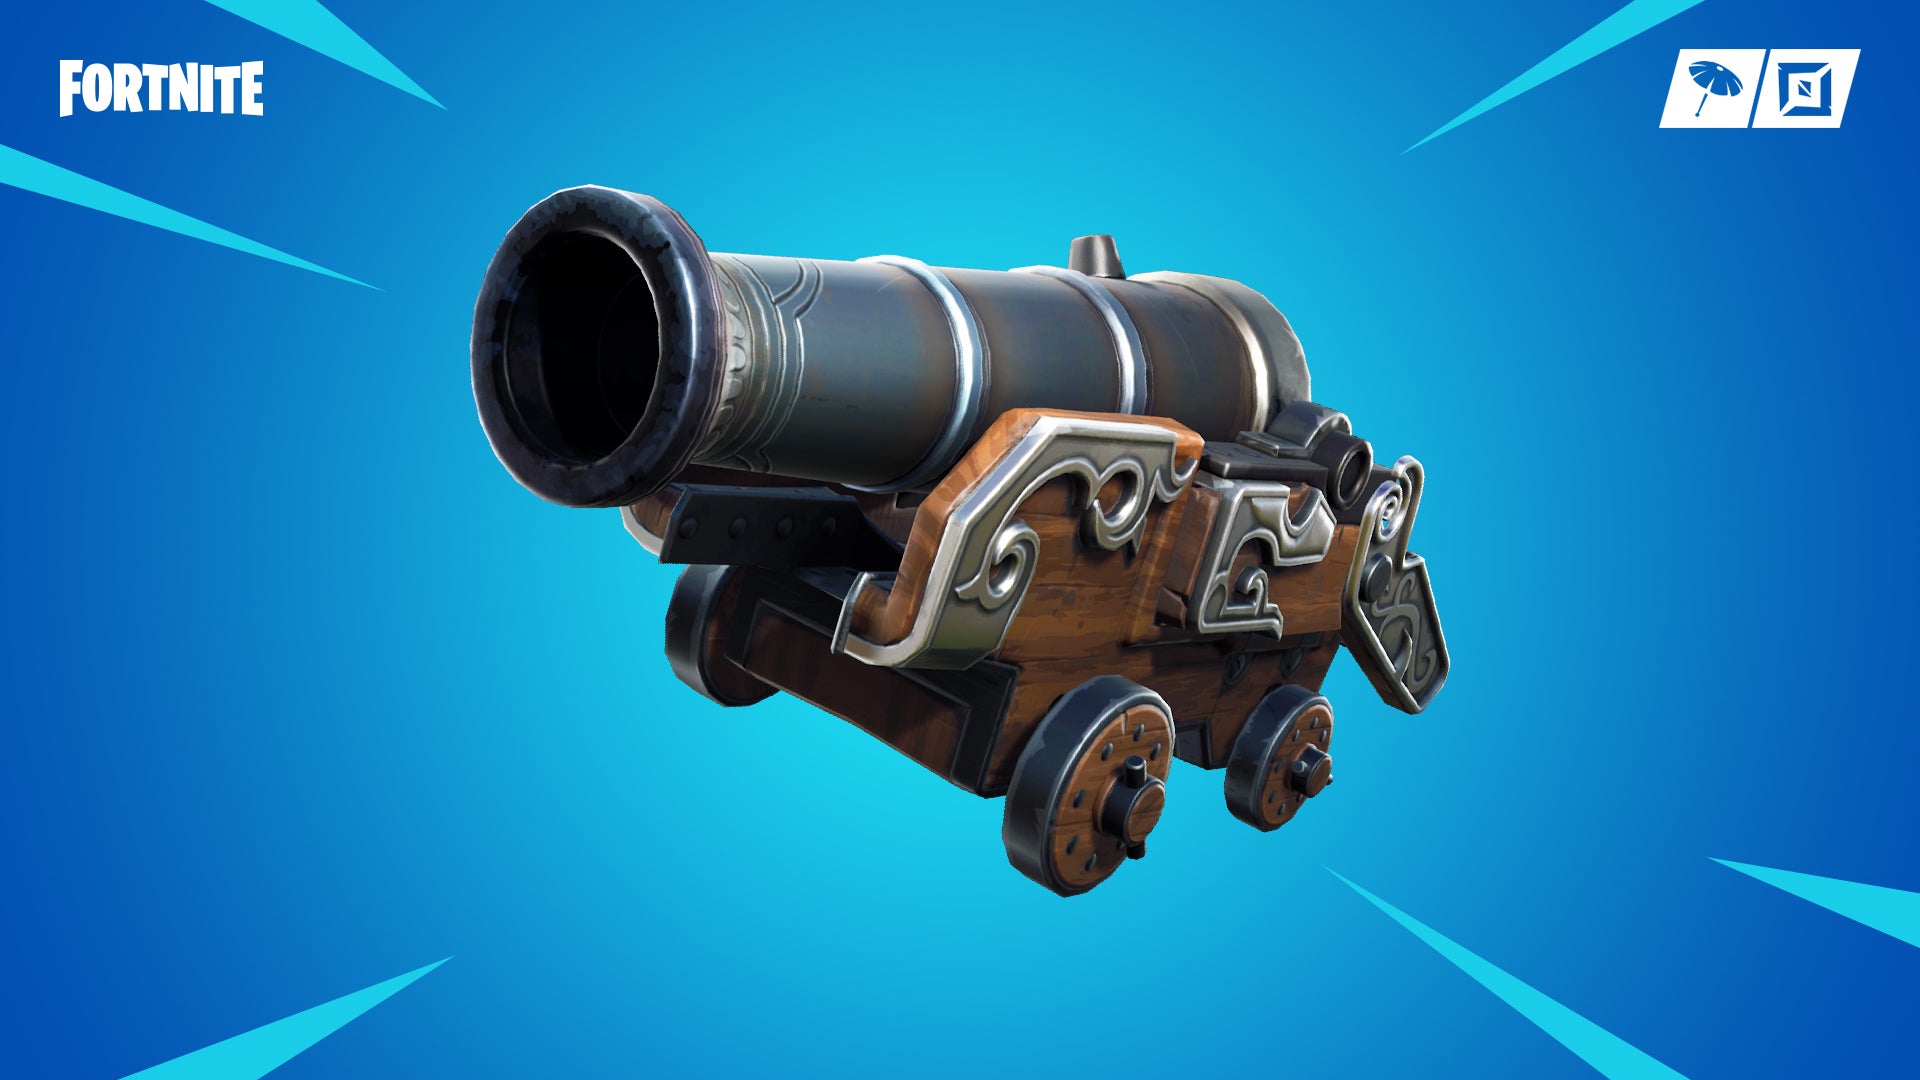 Image for Fortnite v8.00 update adds Pirate Cannon, new named locations, lava and Creative voice chat options